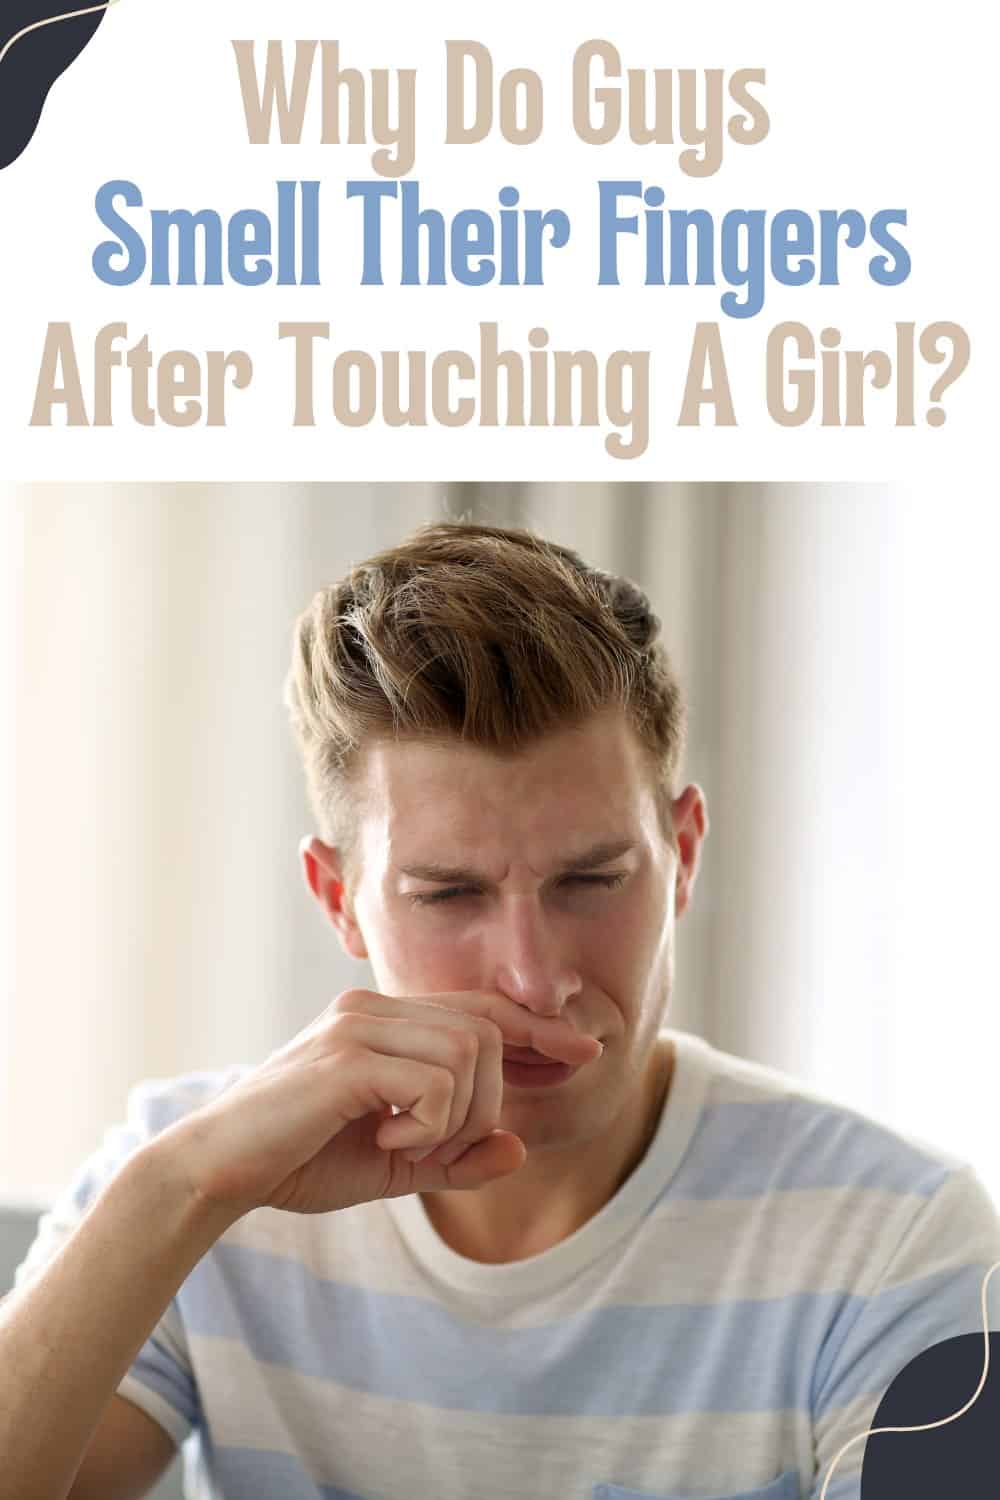 Guys sniff their fingers after touching a girl to smell their partner